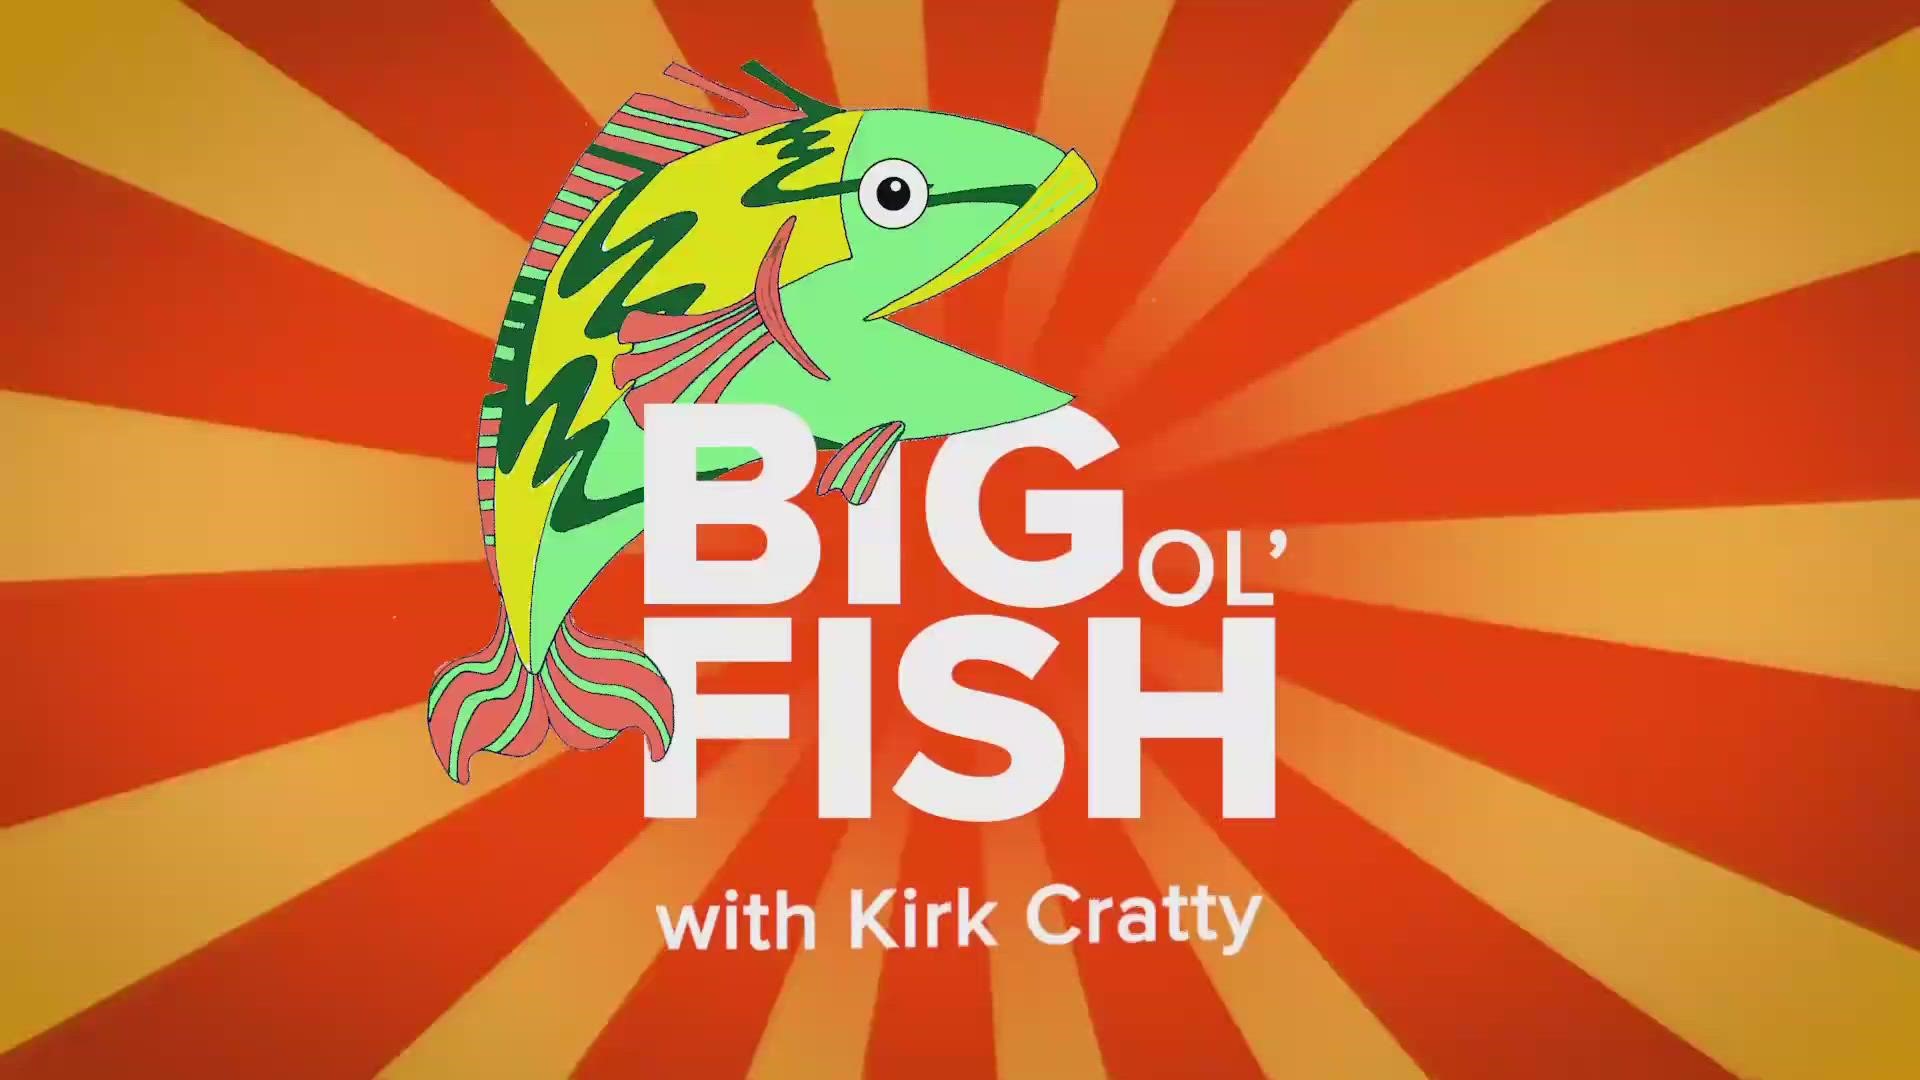 It's the Big Ol' Fish show with Kirk Cratty on Saturday, June 3, 2023.